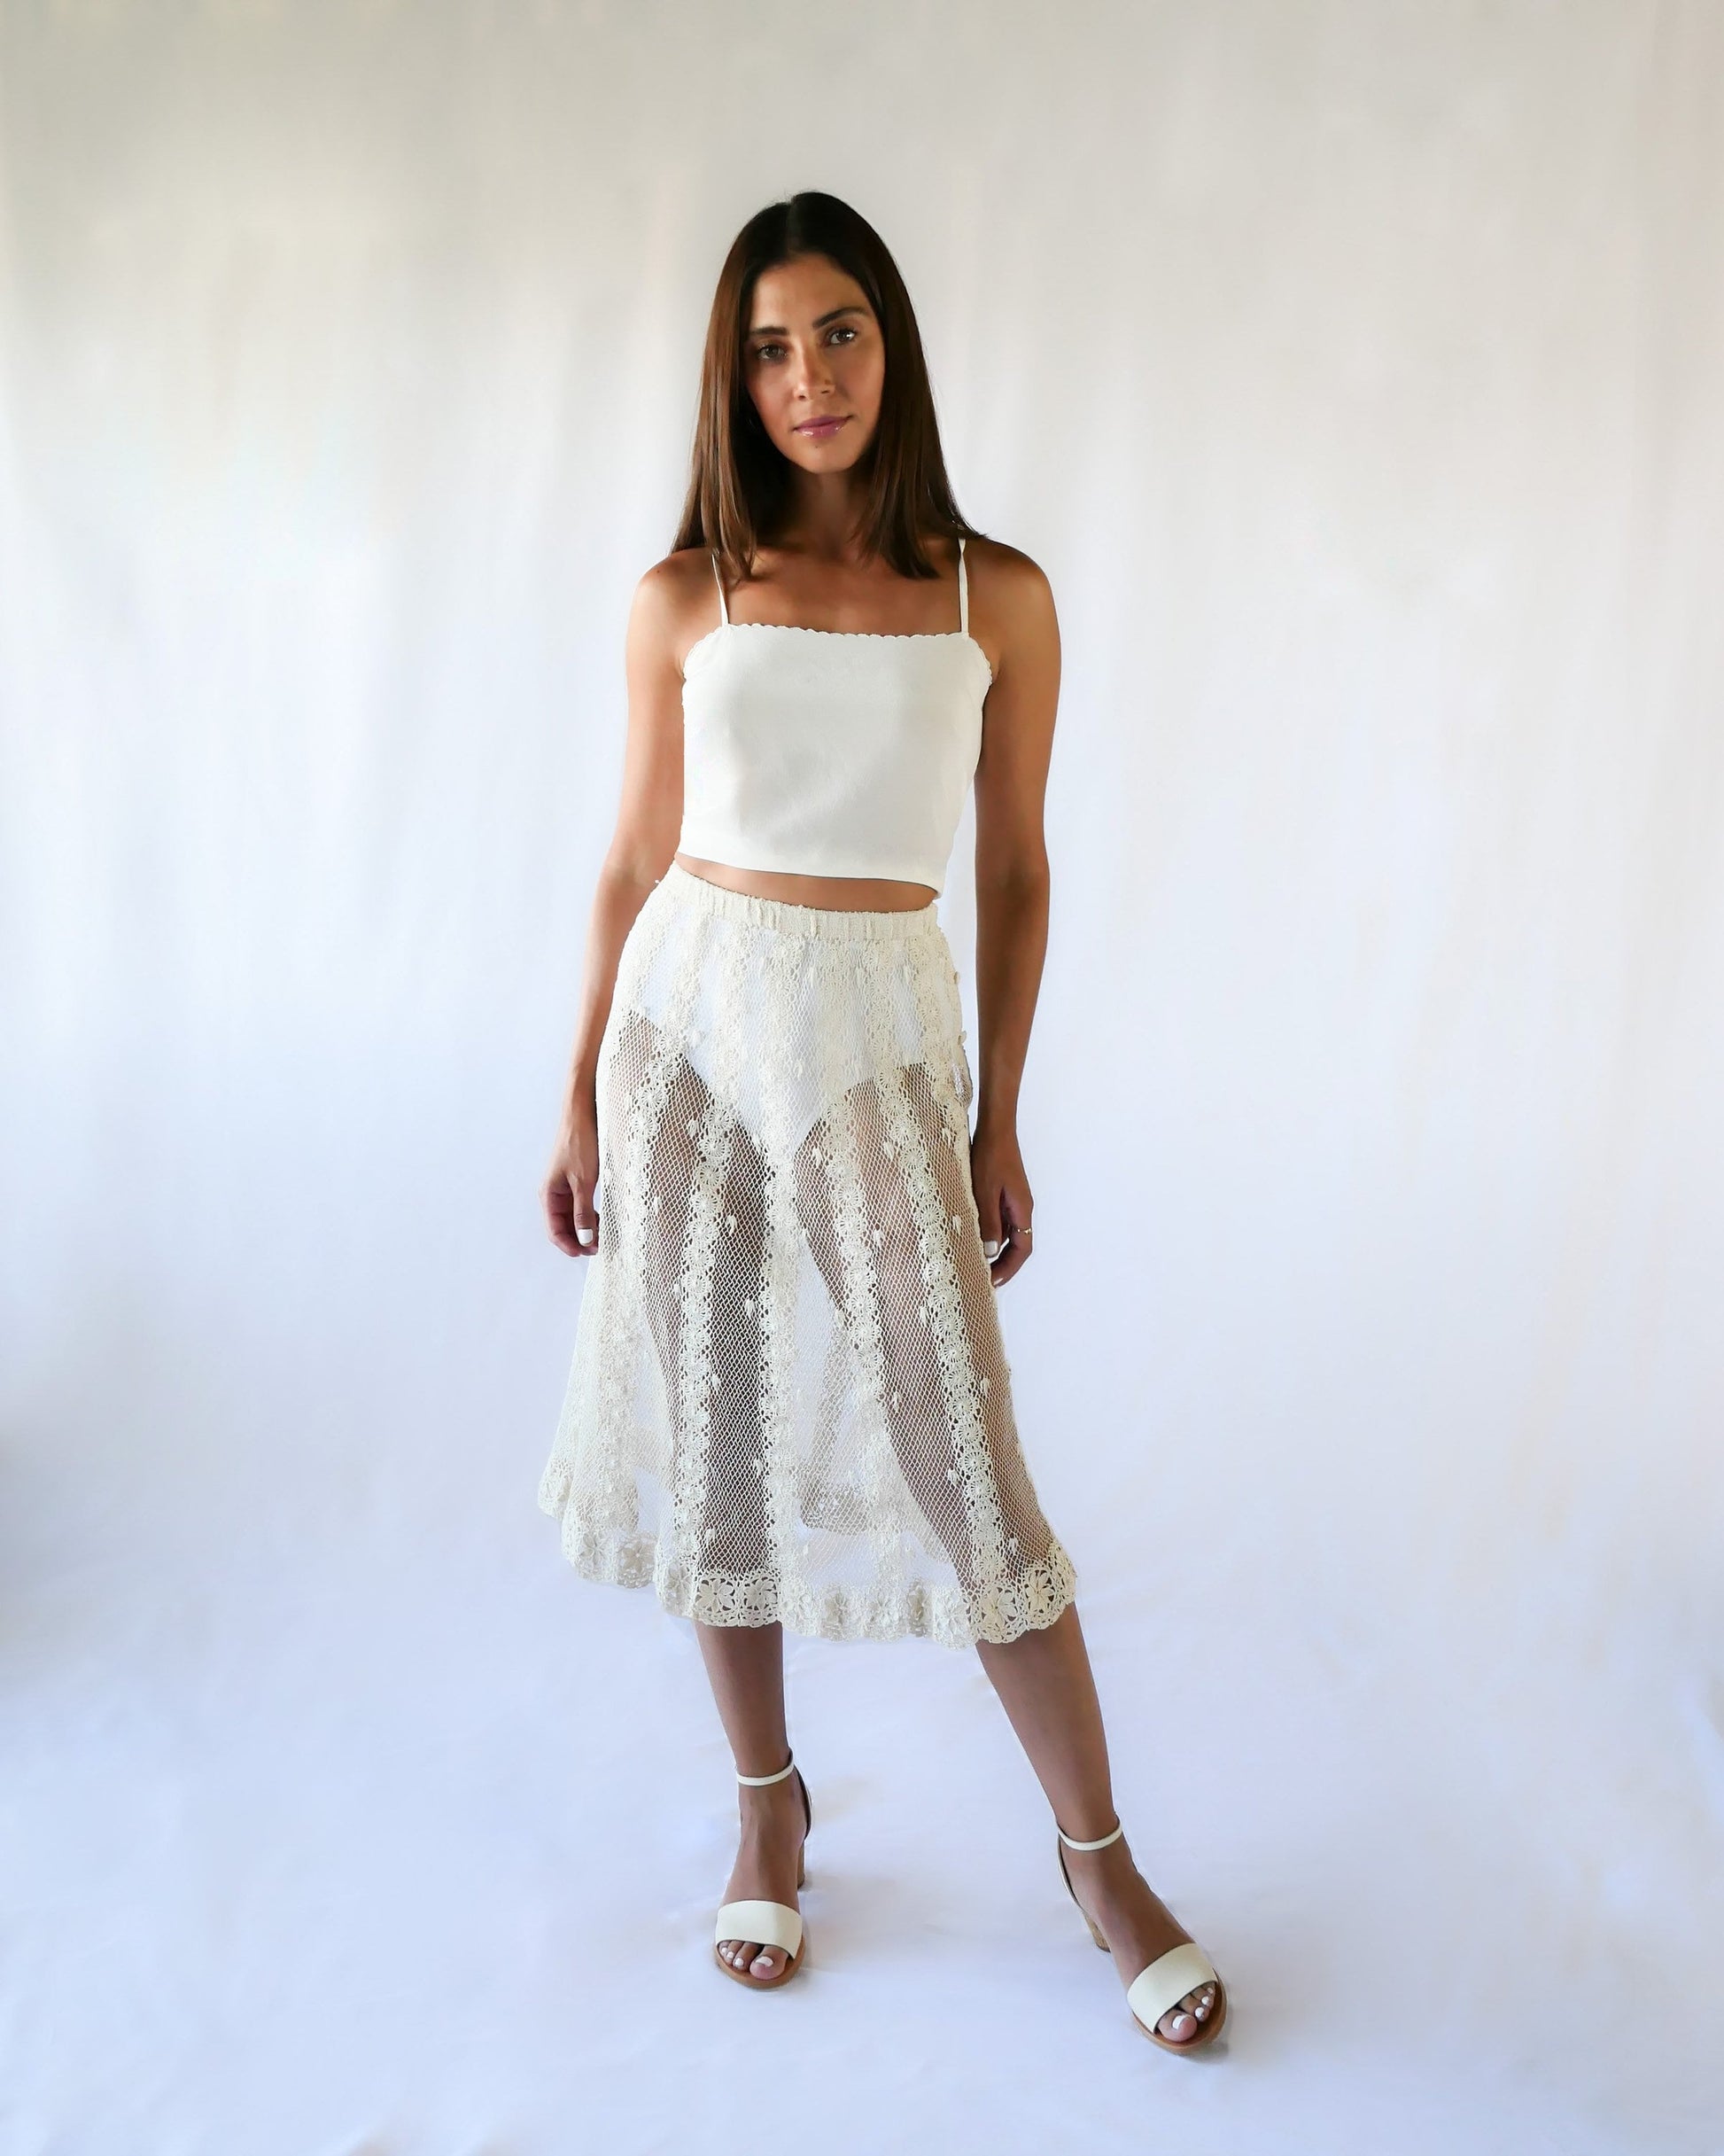 This Lim's Vintage crochet skirt is made with very fine threads to form a delicate net-like pattern throughout, coupled with vertical stripes made of linking pinwheel shaped circles, and a floral motif hem. The skirt is slightly stretchable and comes with a comfortable elastic waistband and buttons up one side of the waist.